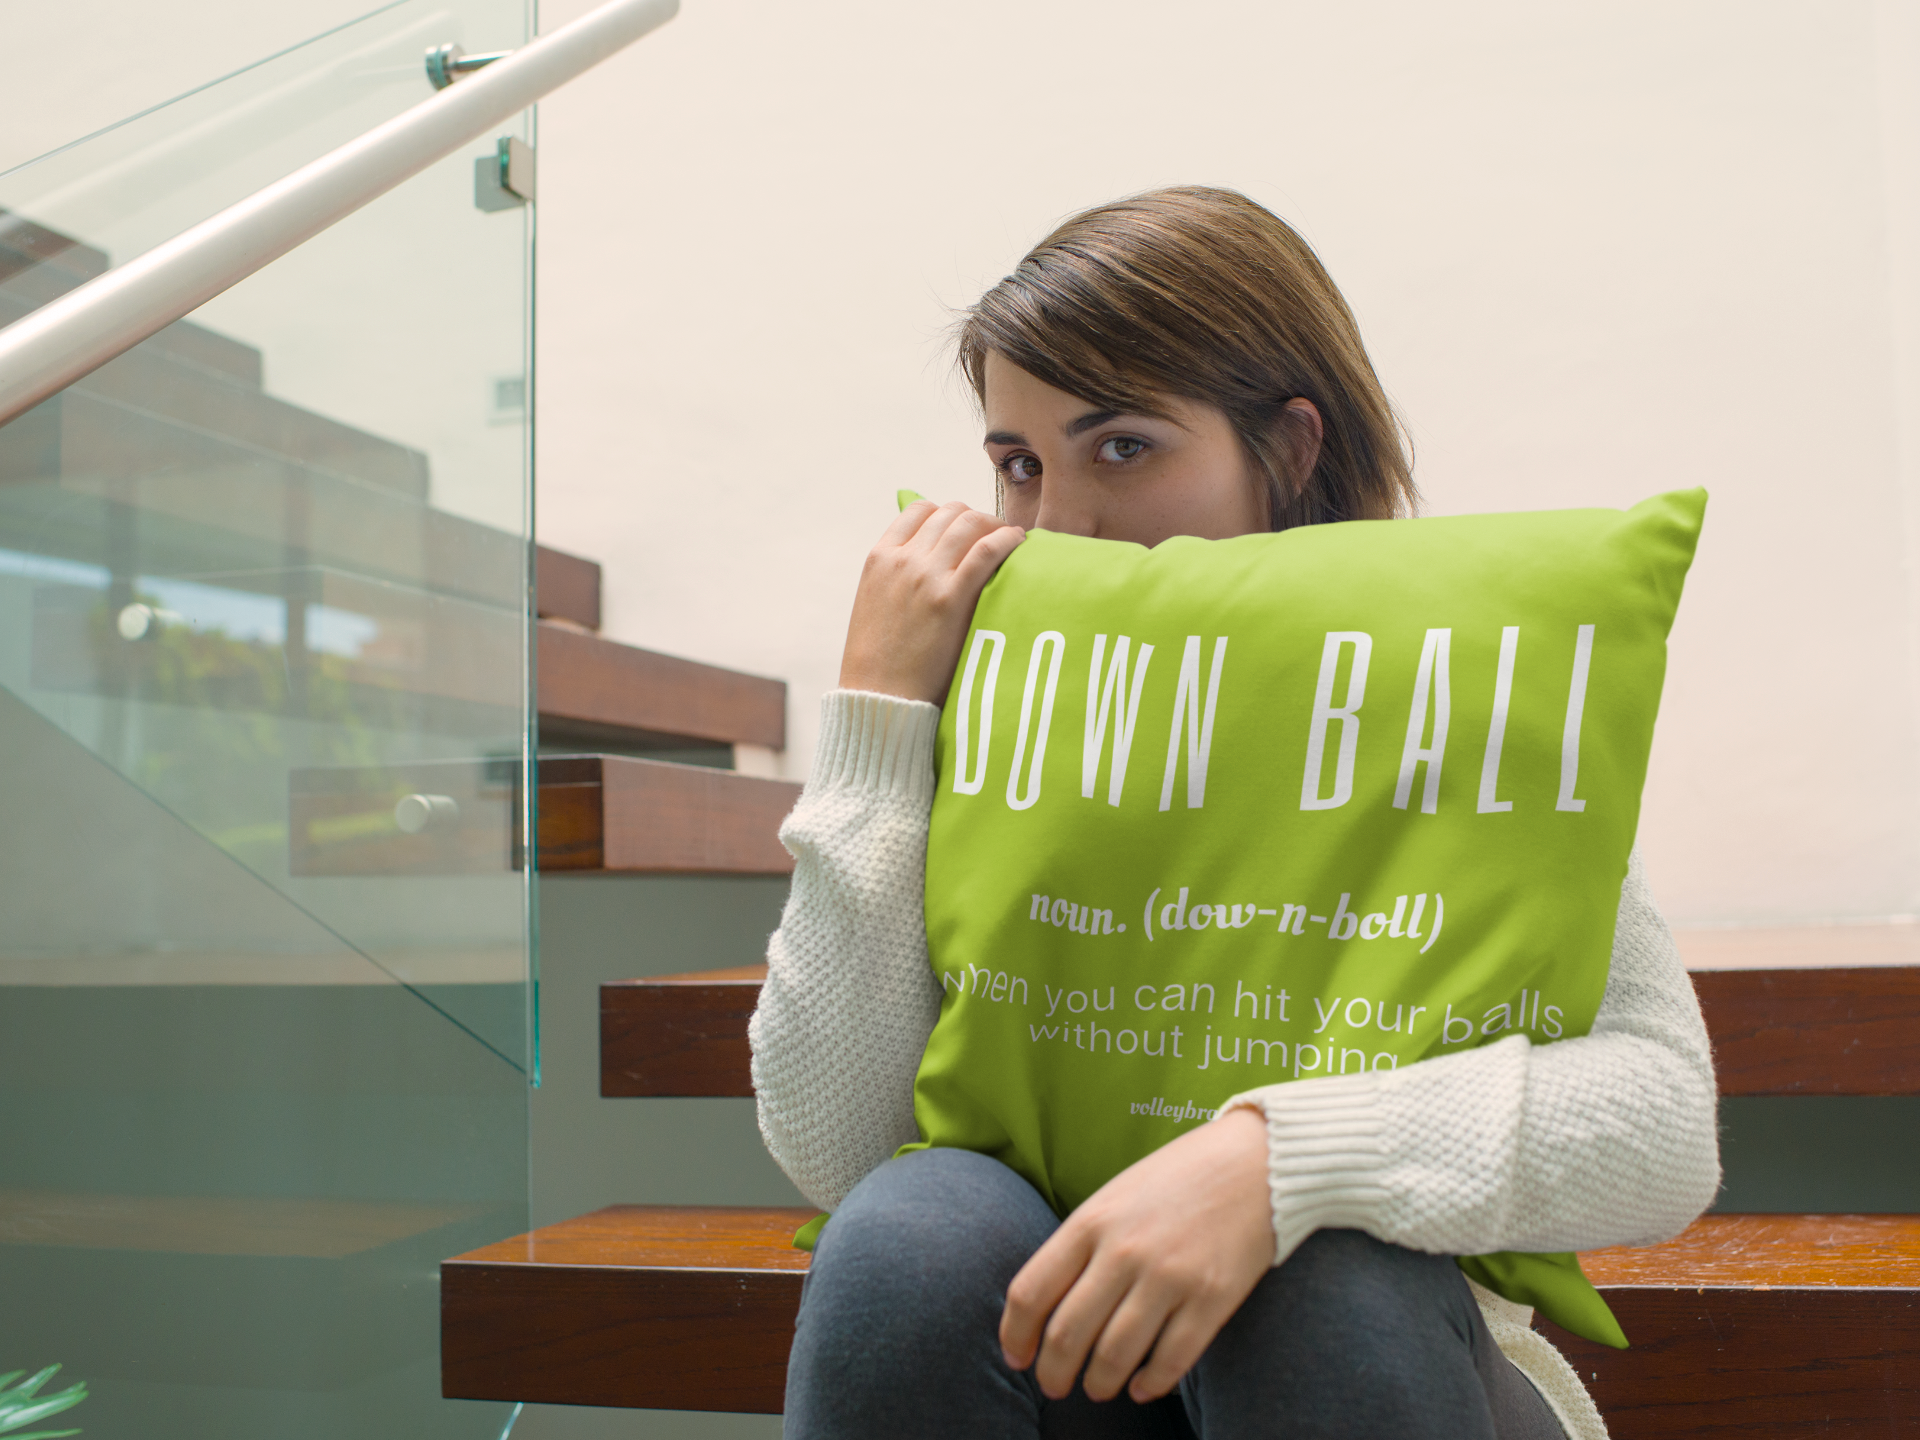 The "down ball in volleyball" is a volleyball term that hitters use for attacking the ball on the court without using a spike approach jump to score points.
April Chapple, Elite Volleyball Coach, Launches a Hilarious Volleyball T-shirt Line With Fun Tongue-in-Cheek Designs sure to make players and enthusiasts laugh.